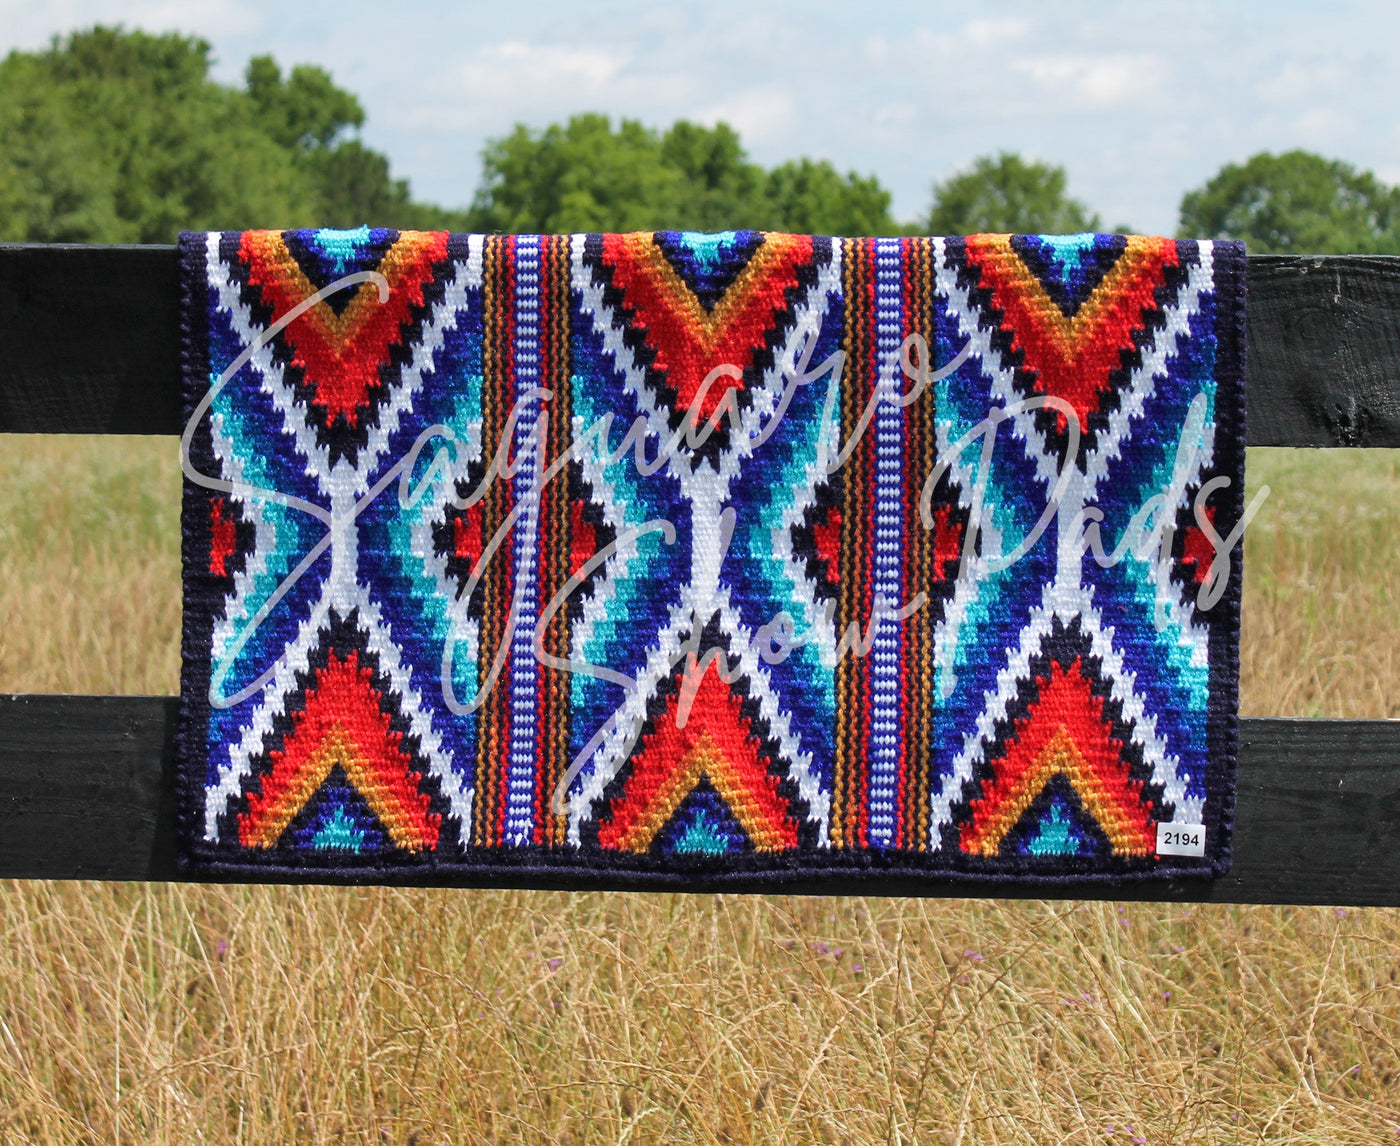 #2194 "X-Factor" Ranch Pad - Re-Order